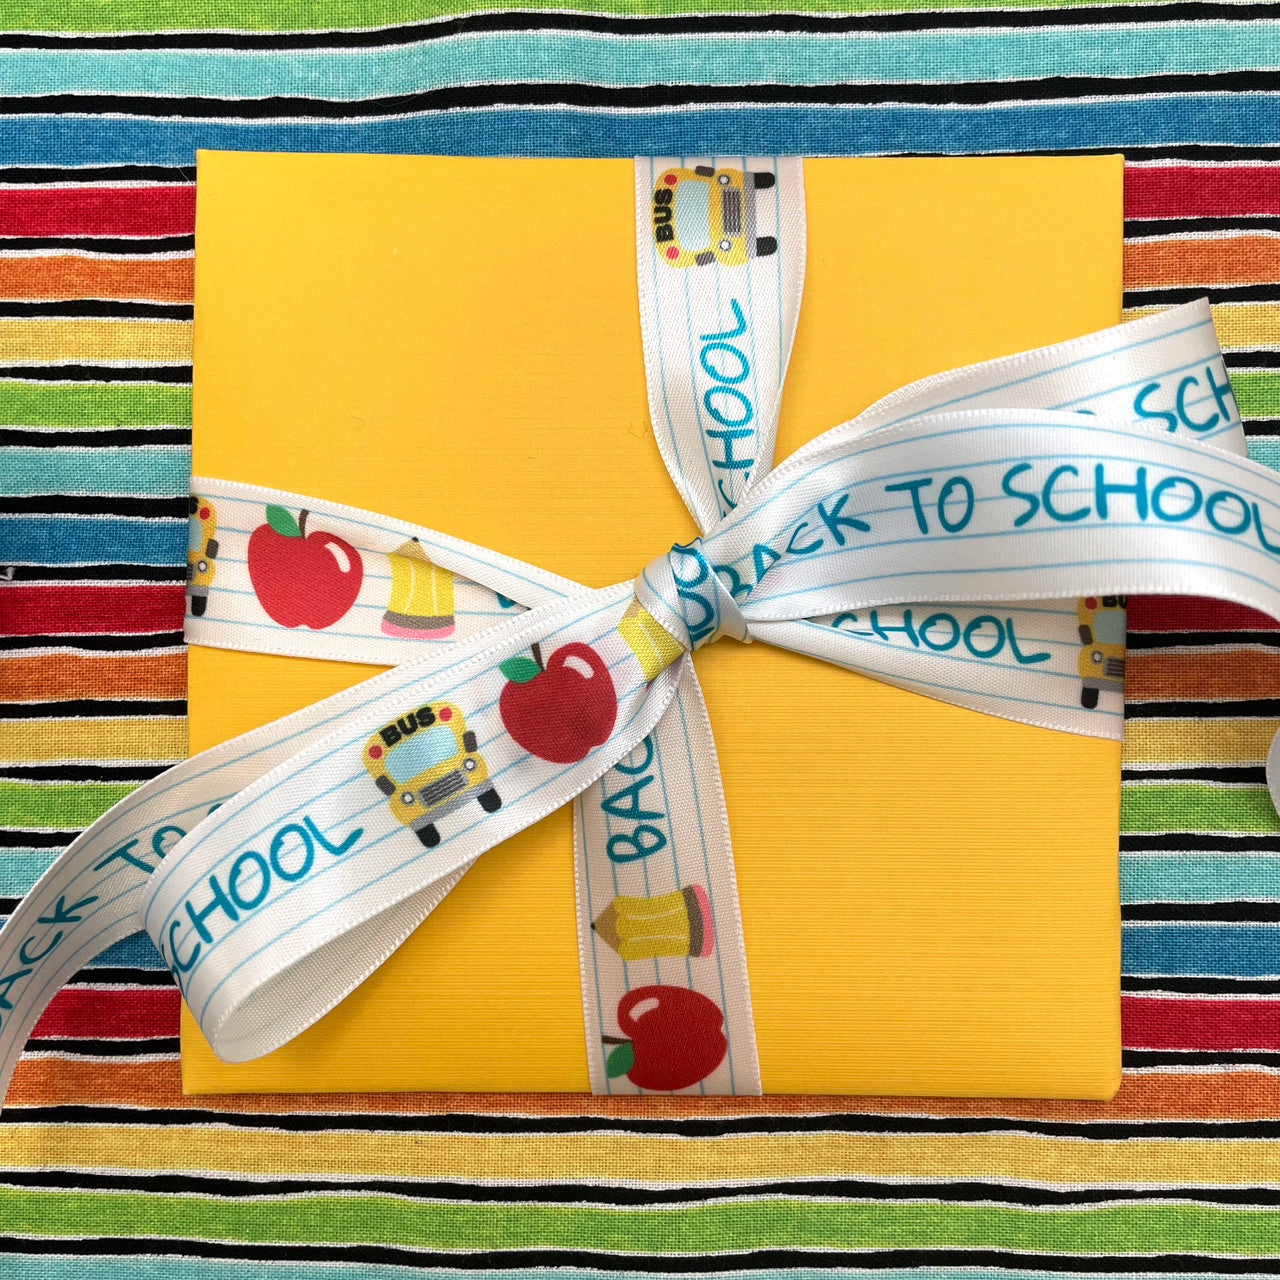 Tie a beautiful bow on a back to school gifts for starting off on the right foot with your school!